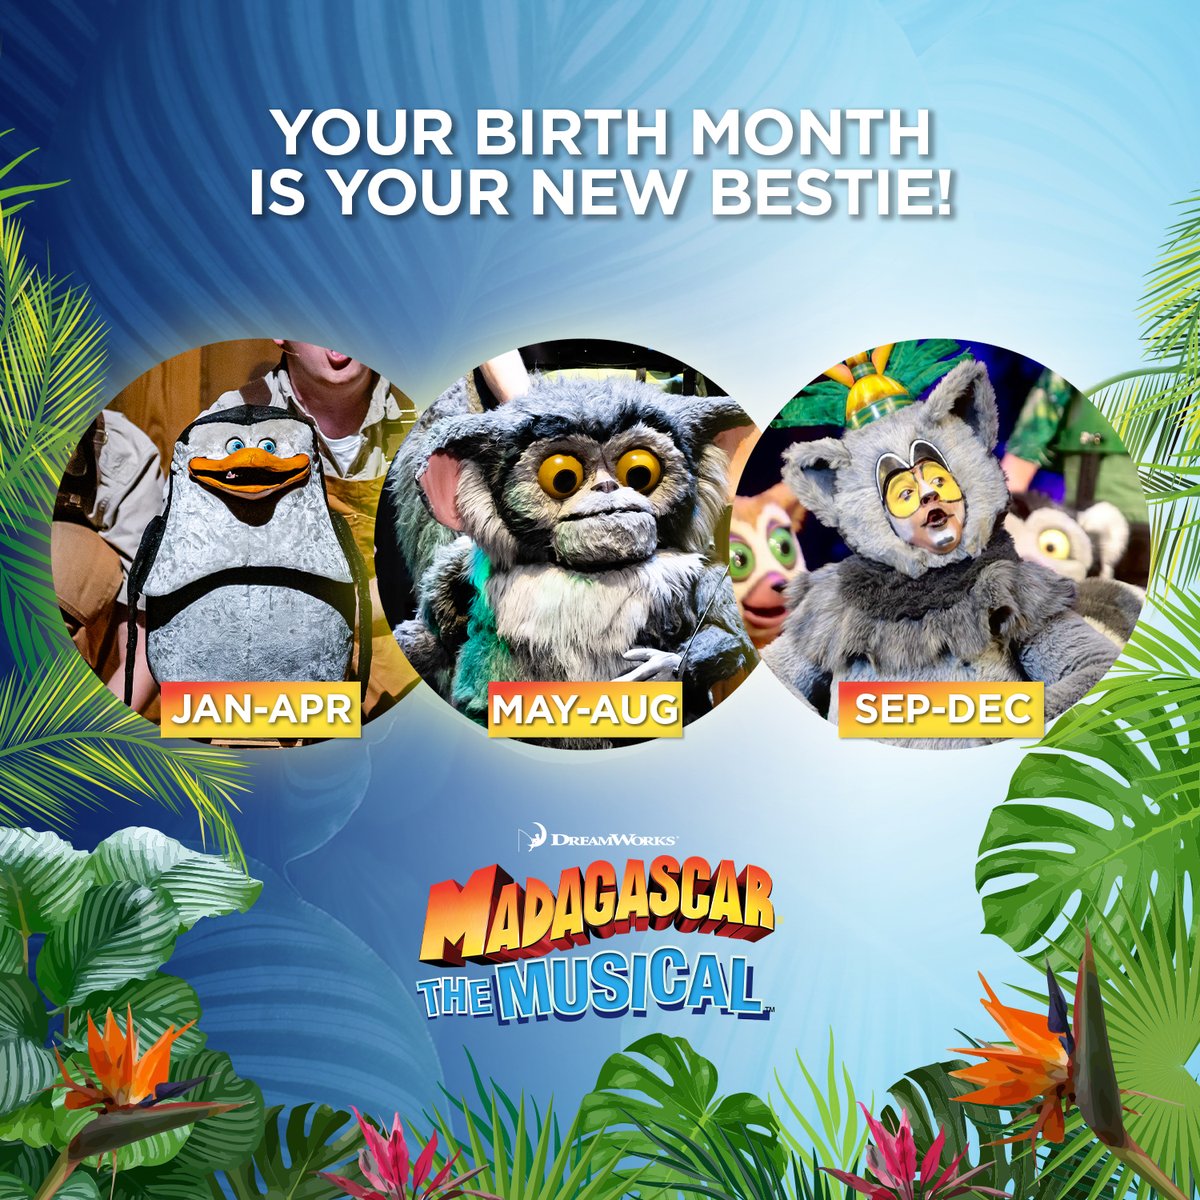 It’s your first day in the jungle, who is your new bestie? 🌴 #MadagascarMusical